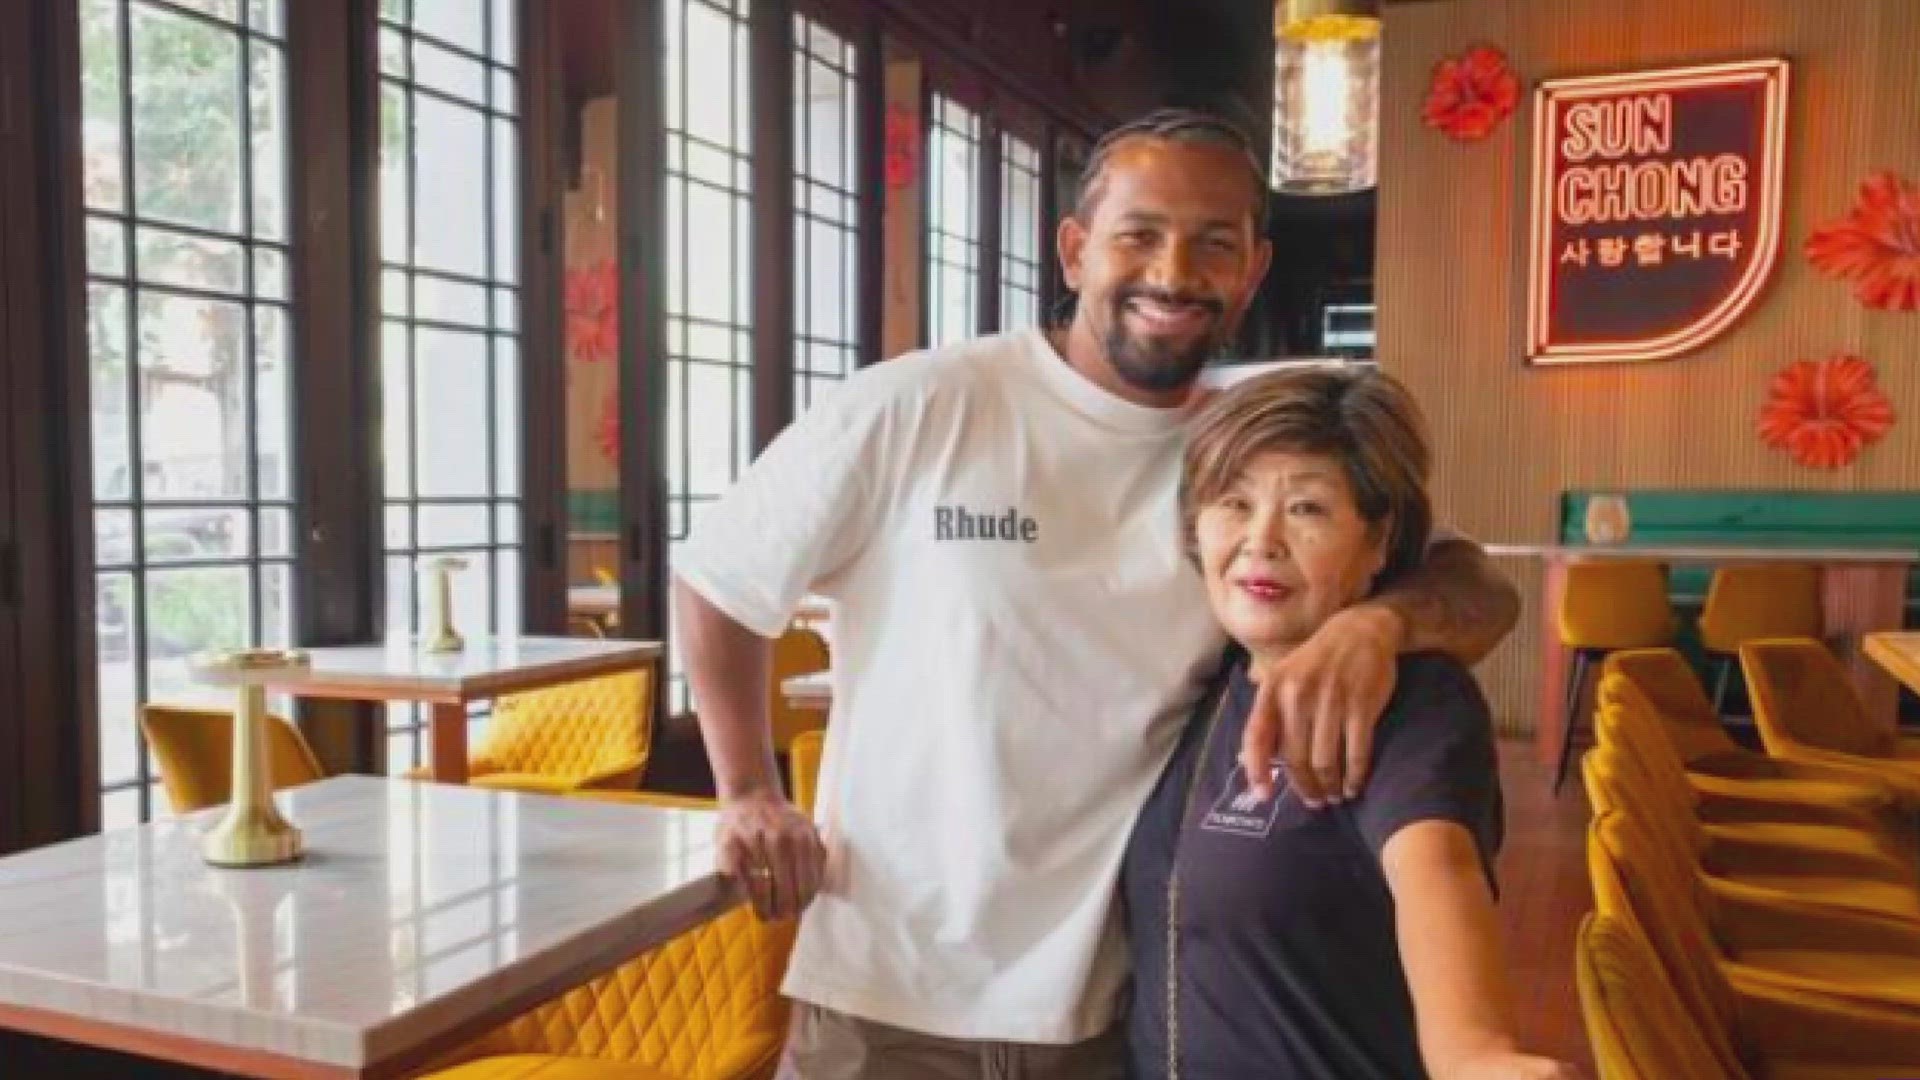 Sun Chong NOLA, latest restaurant by Larry Morrow, opens in the French Quarter